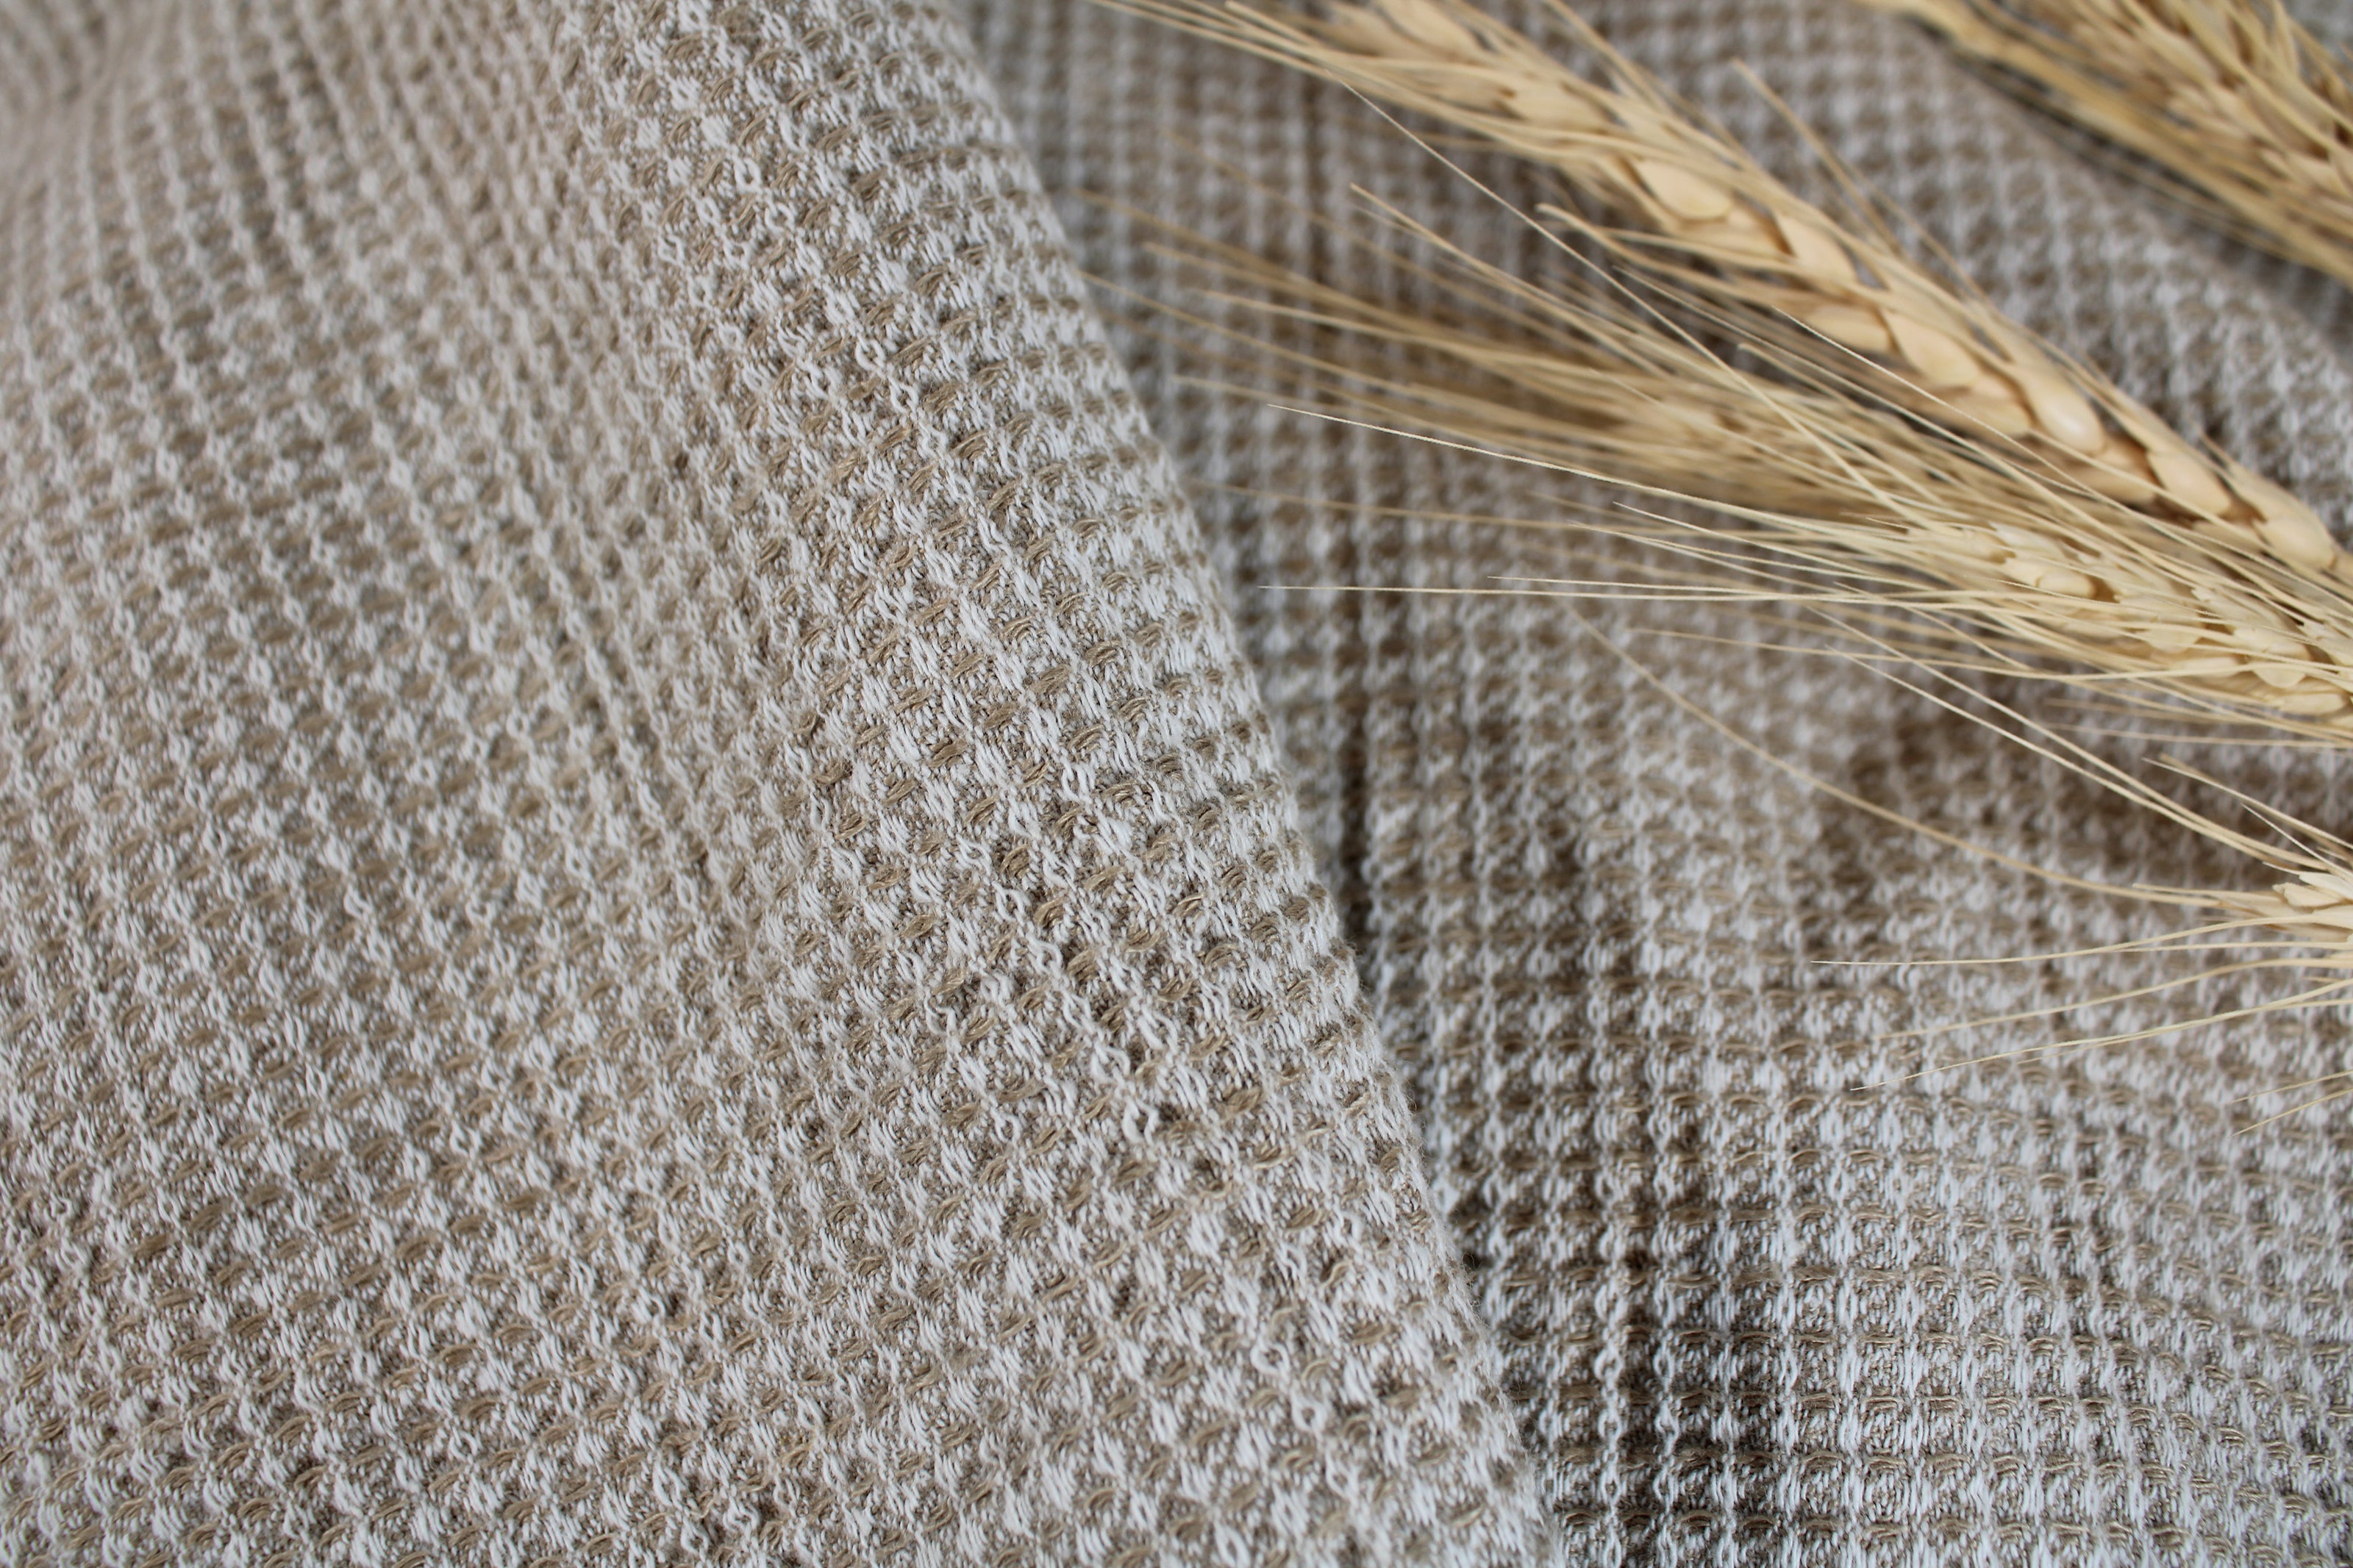 Washed Waffle Linen Fabric / Linen/Cotton Blend Fabric / Buy Linen Fabric Online